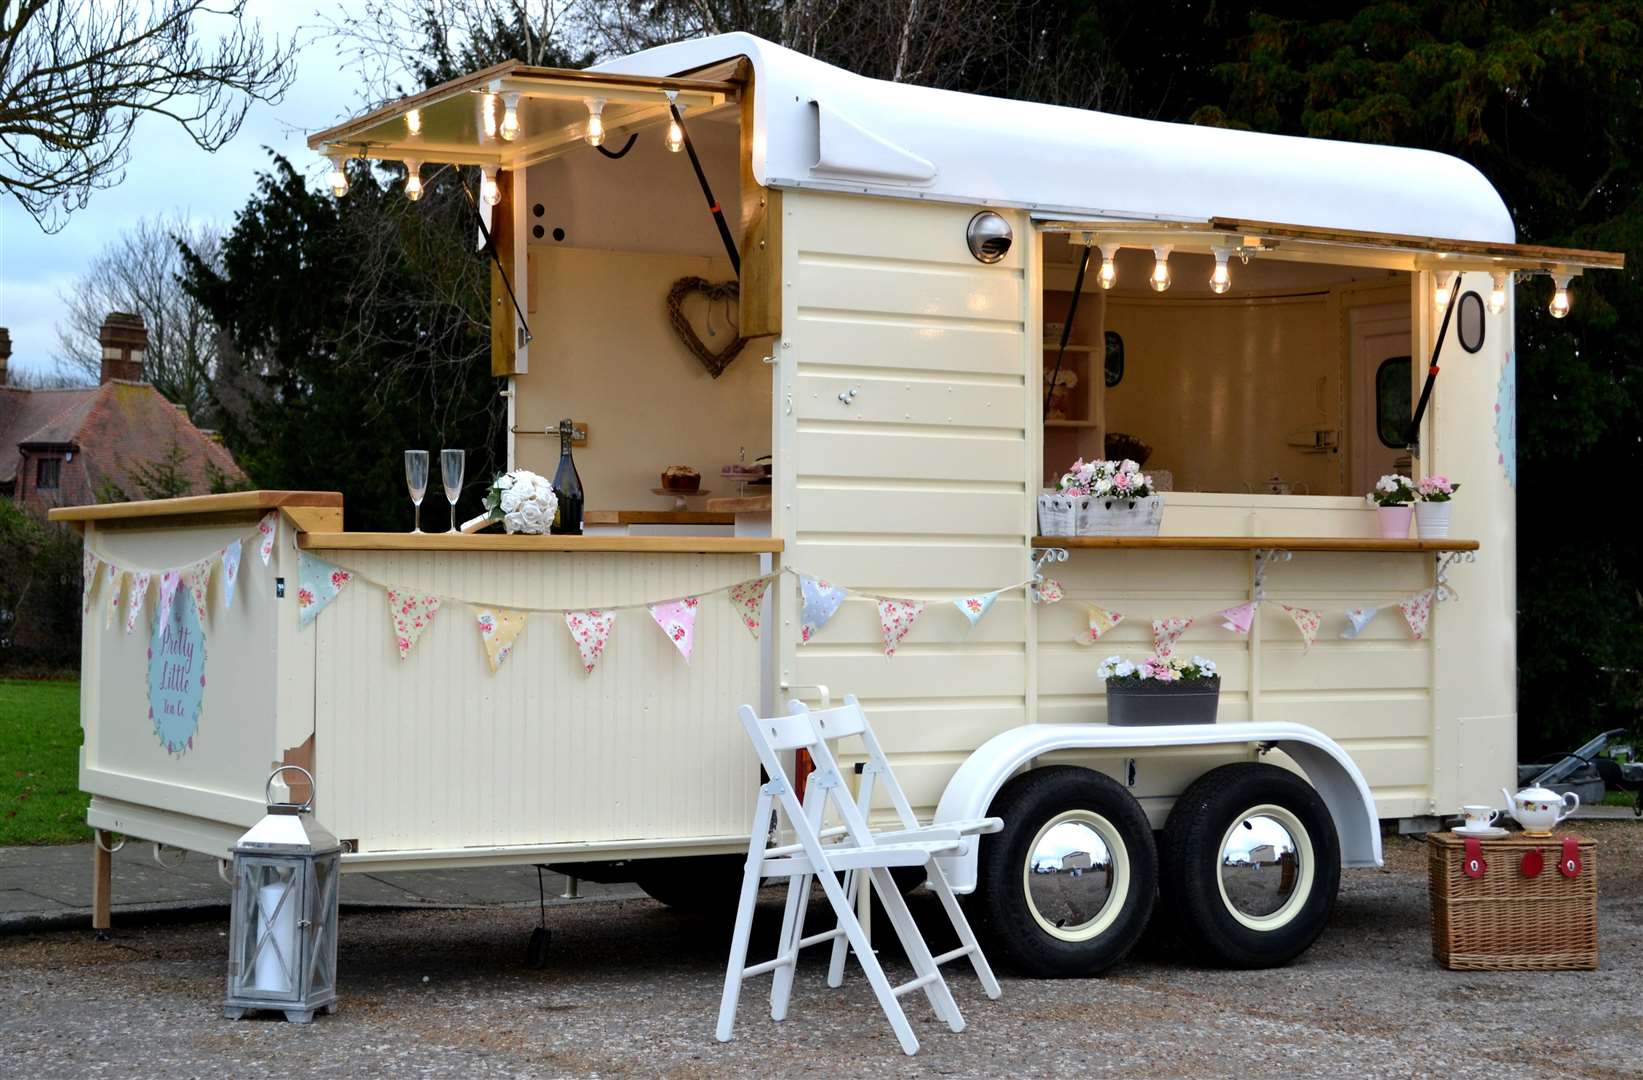 Sophie Dean and Sarah Moroney have launched Pretty Little Tea, a mobile catering business which operates from a converted horsebox